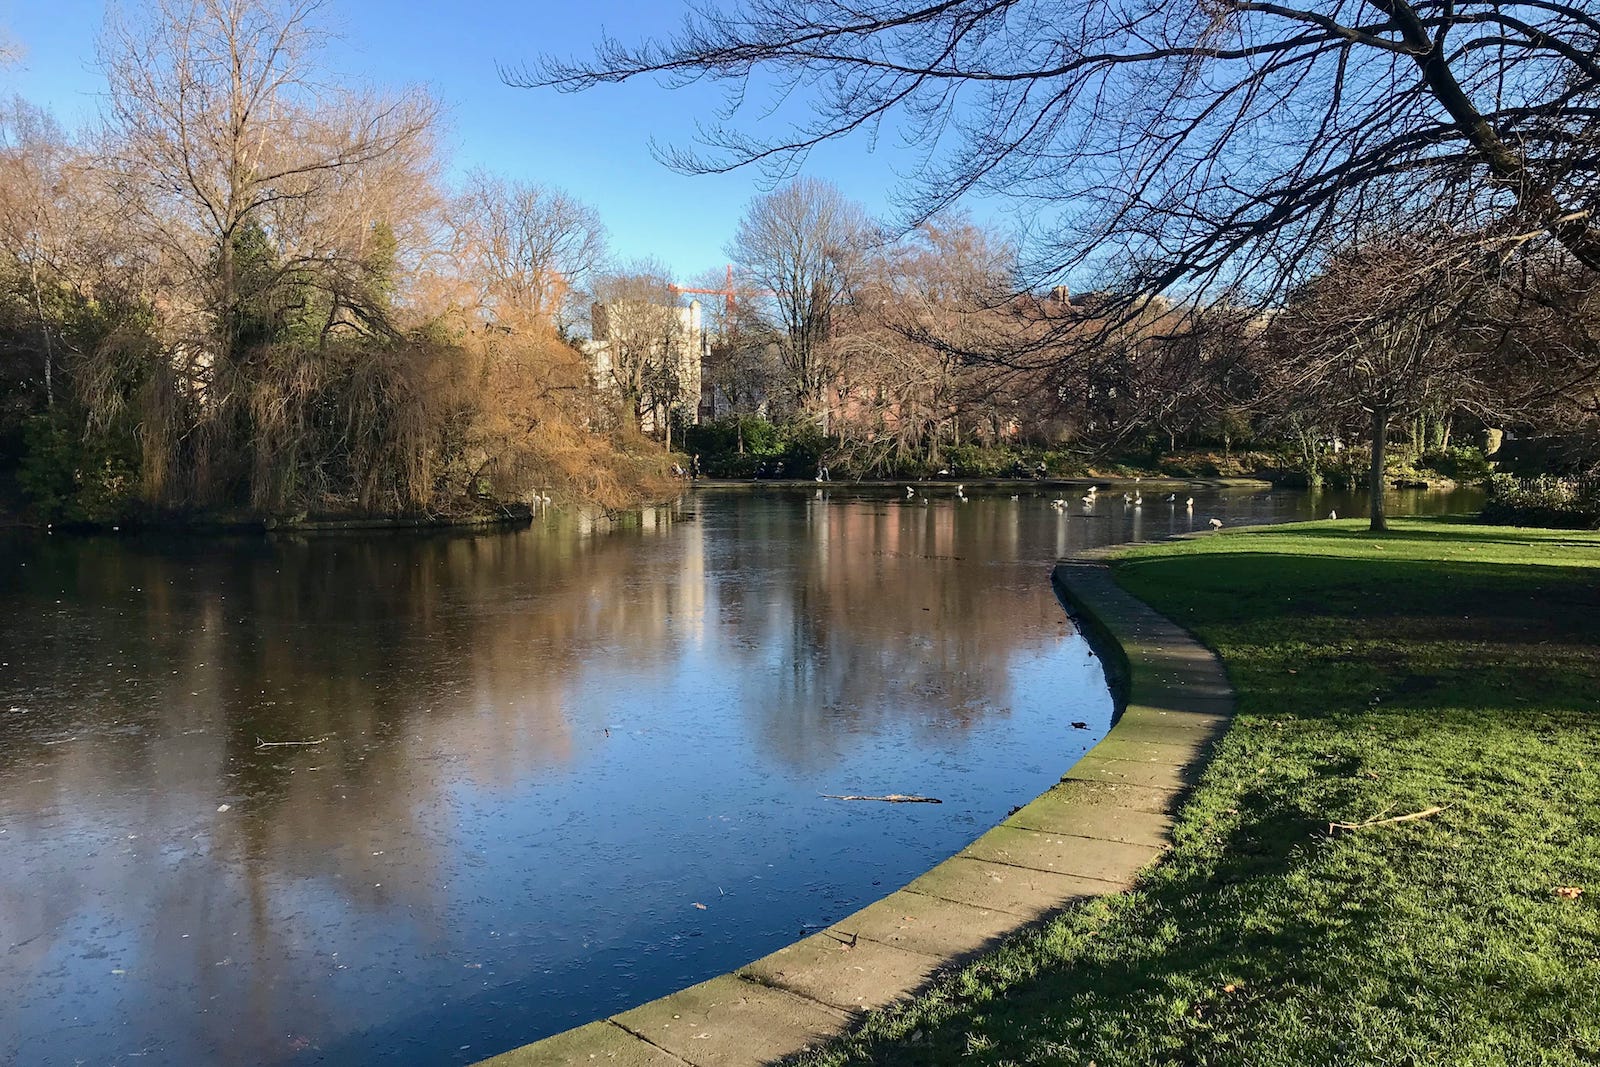 A winter view of a pond in St. Stephen's Green with blue skies